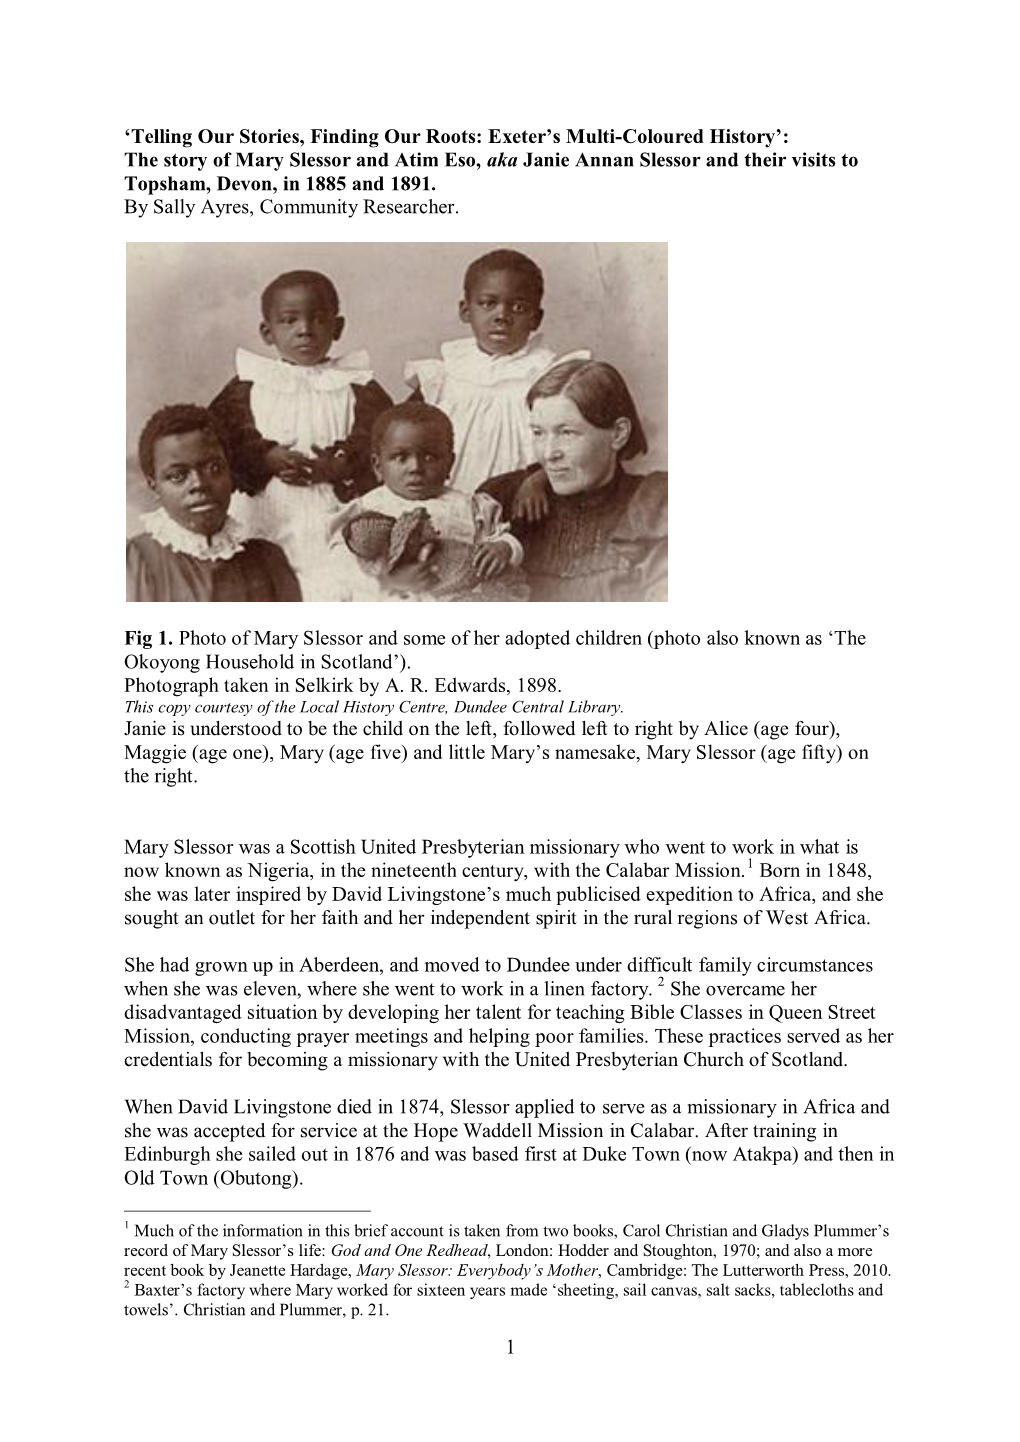 The Story of Mary Slessor and Atim Eso, Aka Janie Annan Slessor and Their Visits to Topsham, Devon, in 1885 and 1891